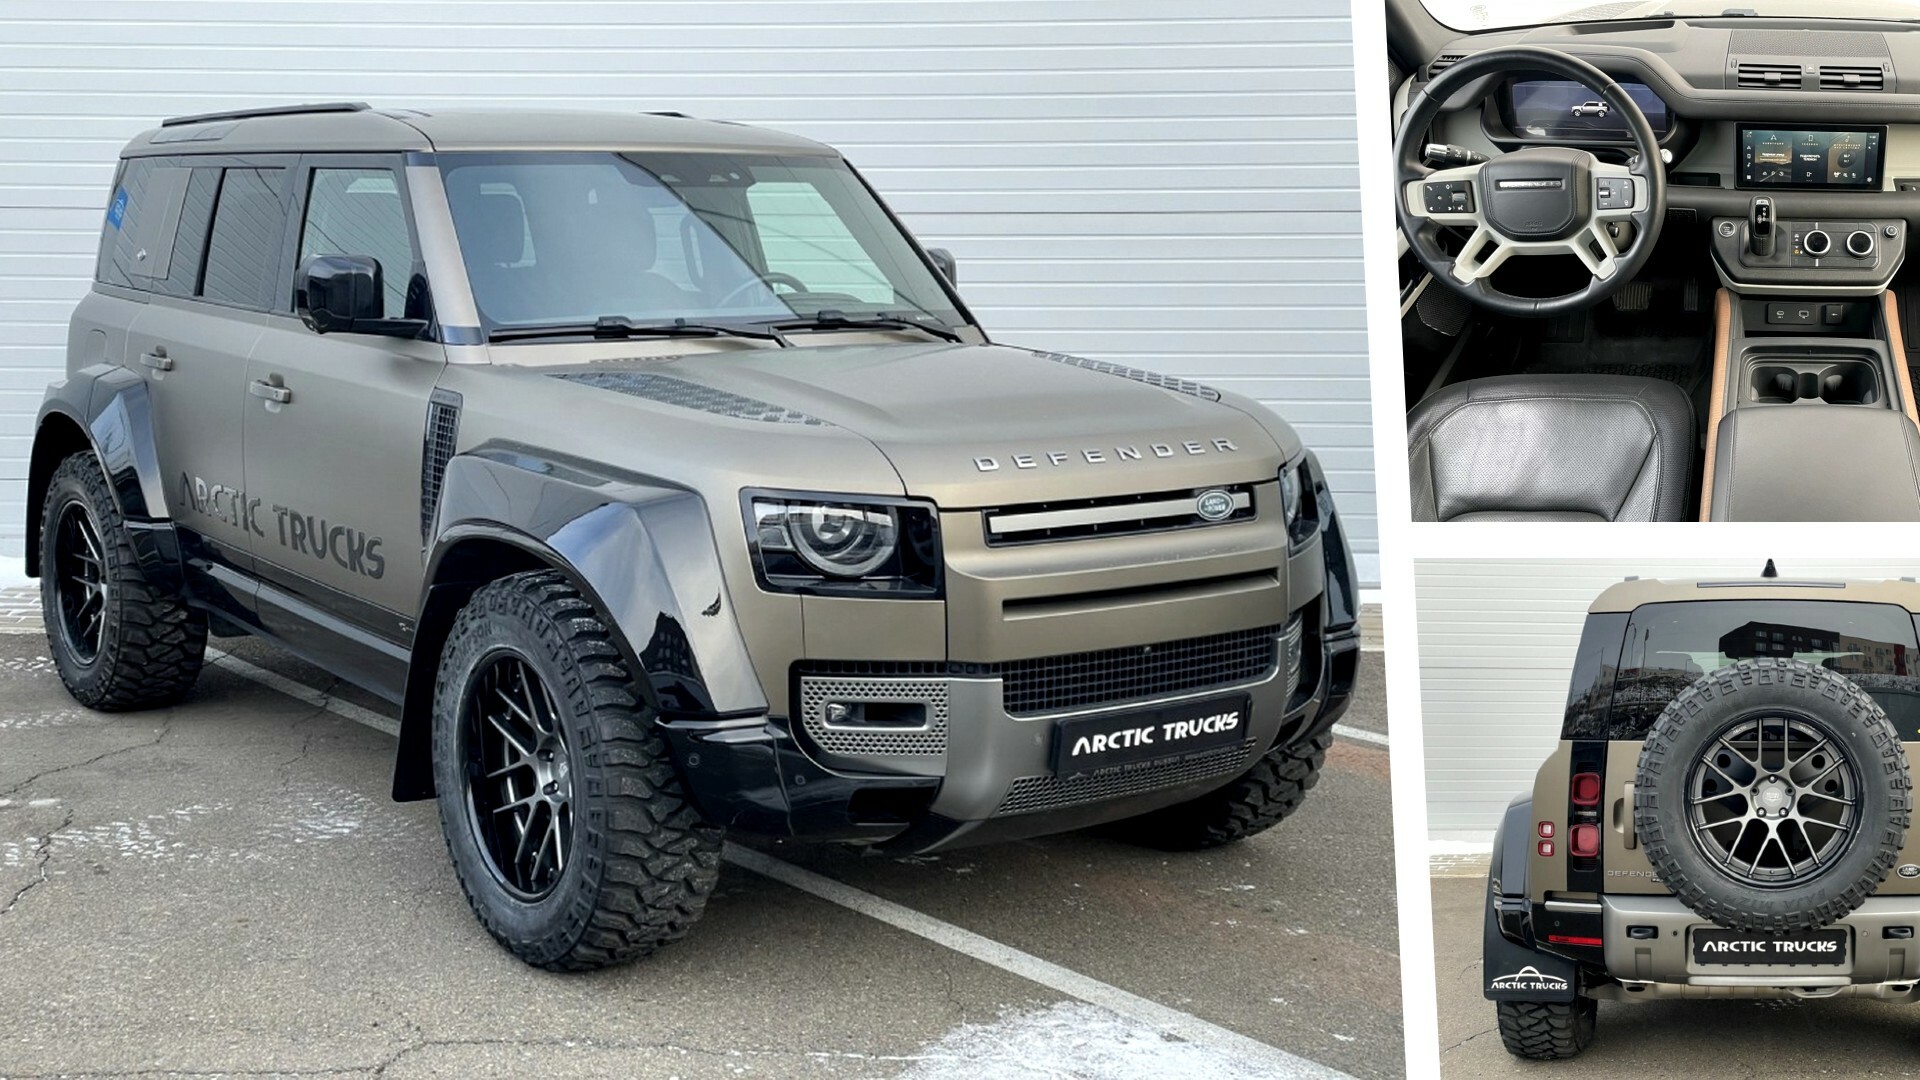 Land Rover Defender Gains 35-Inch Tires And Wide Bodykit By Arctic Trucks